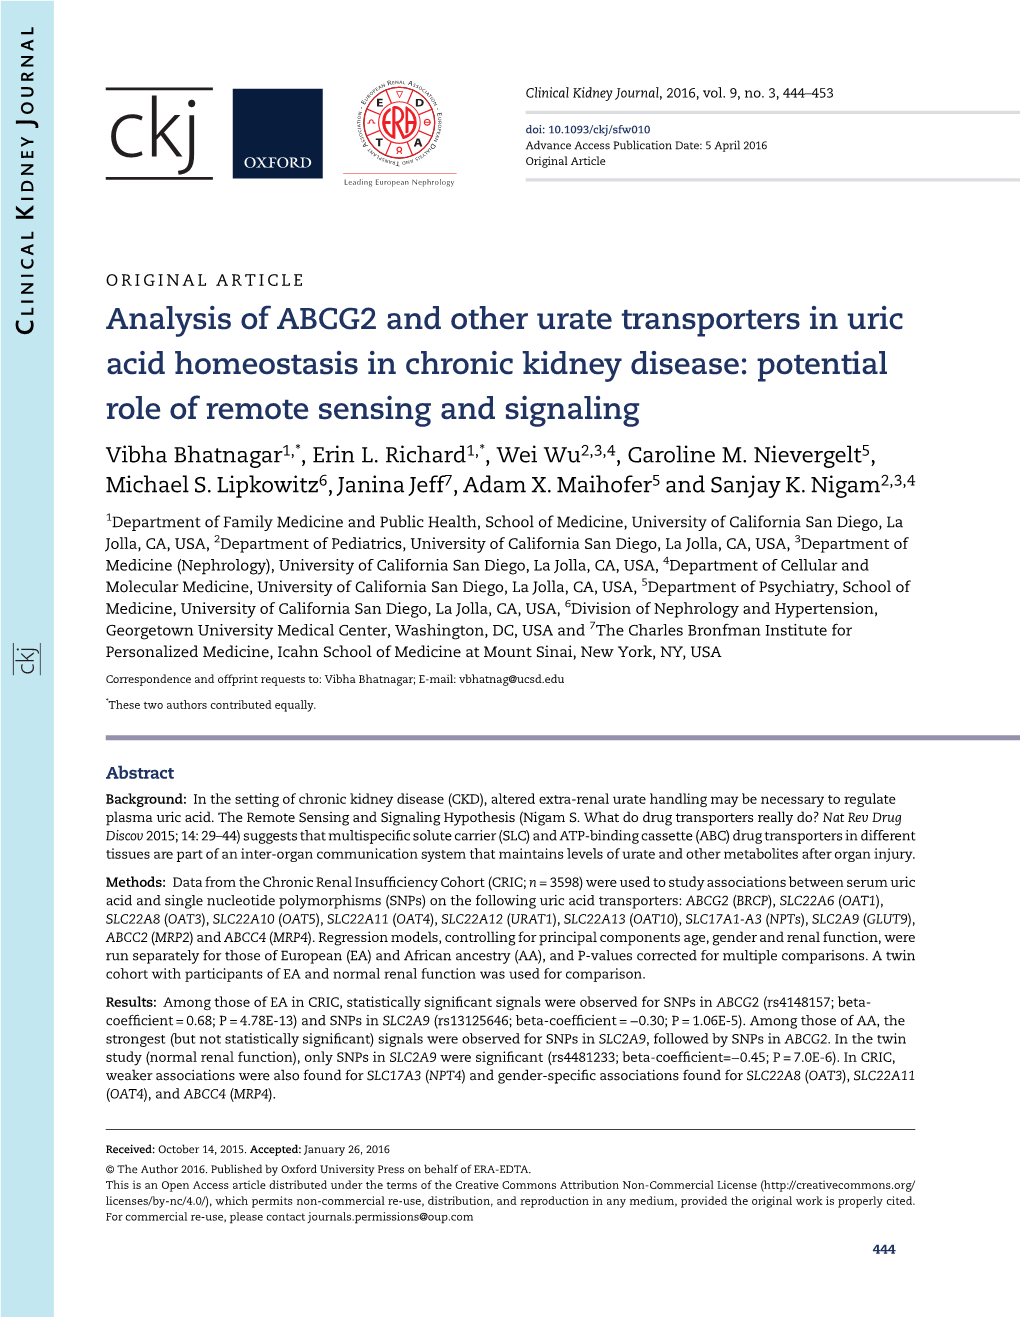 Analysis of ABCG2 and Other Urate Transporters in Uric Acid